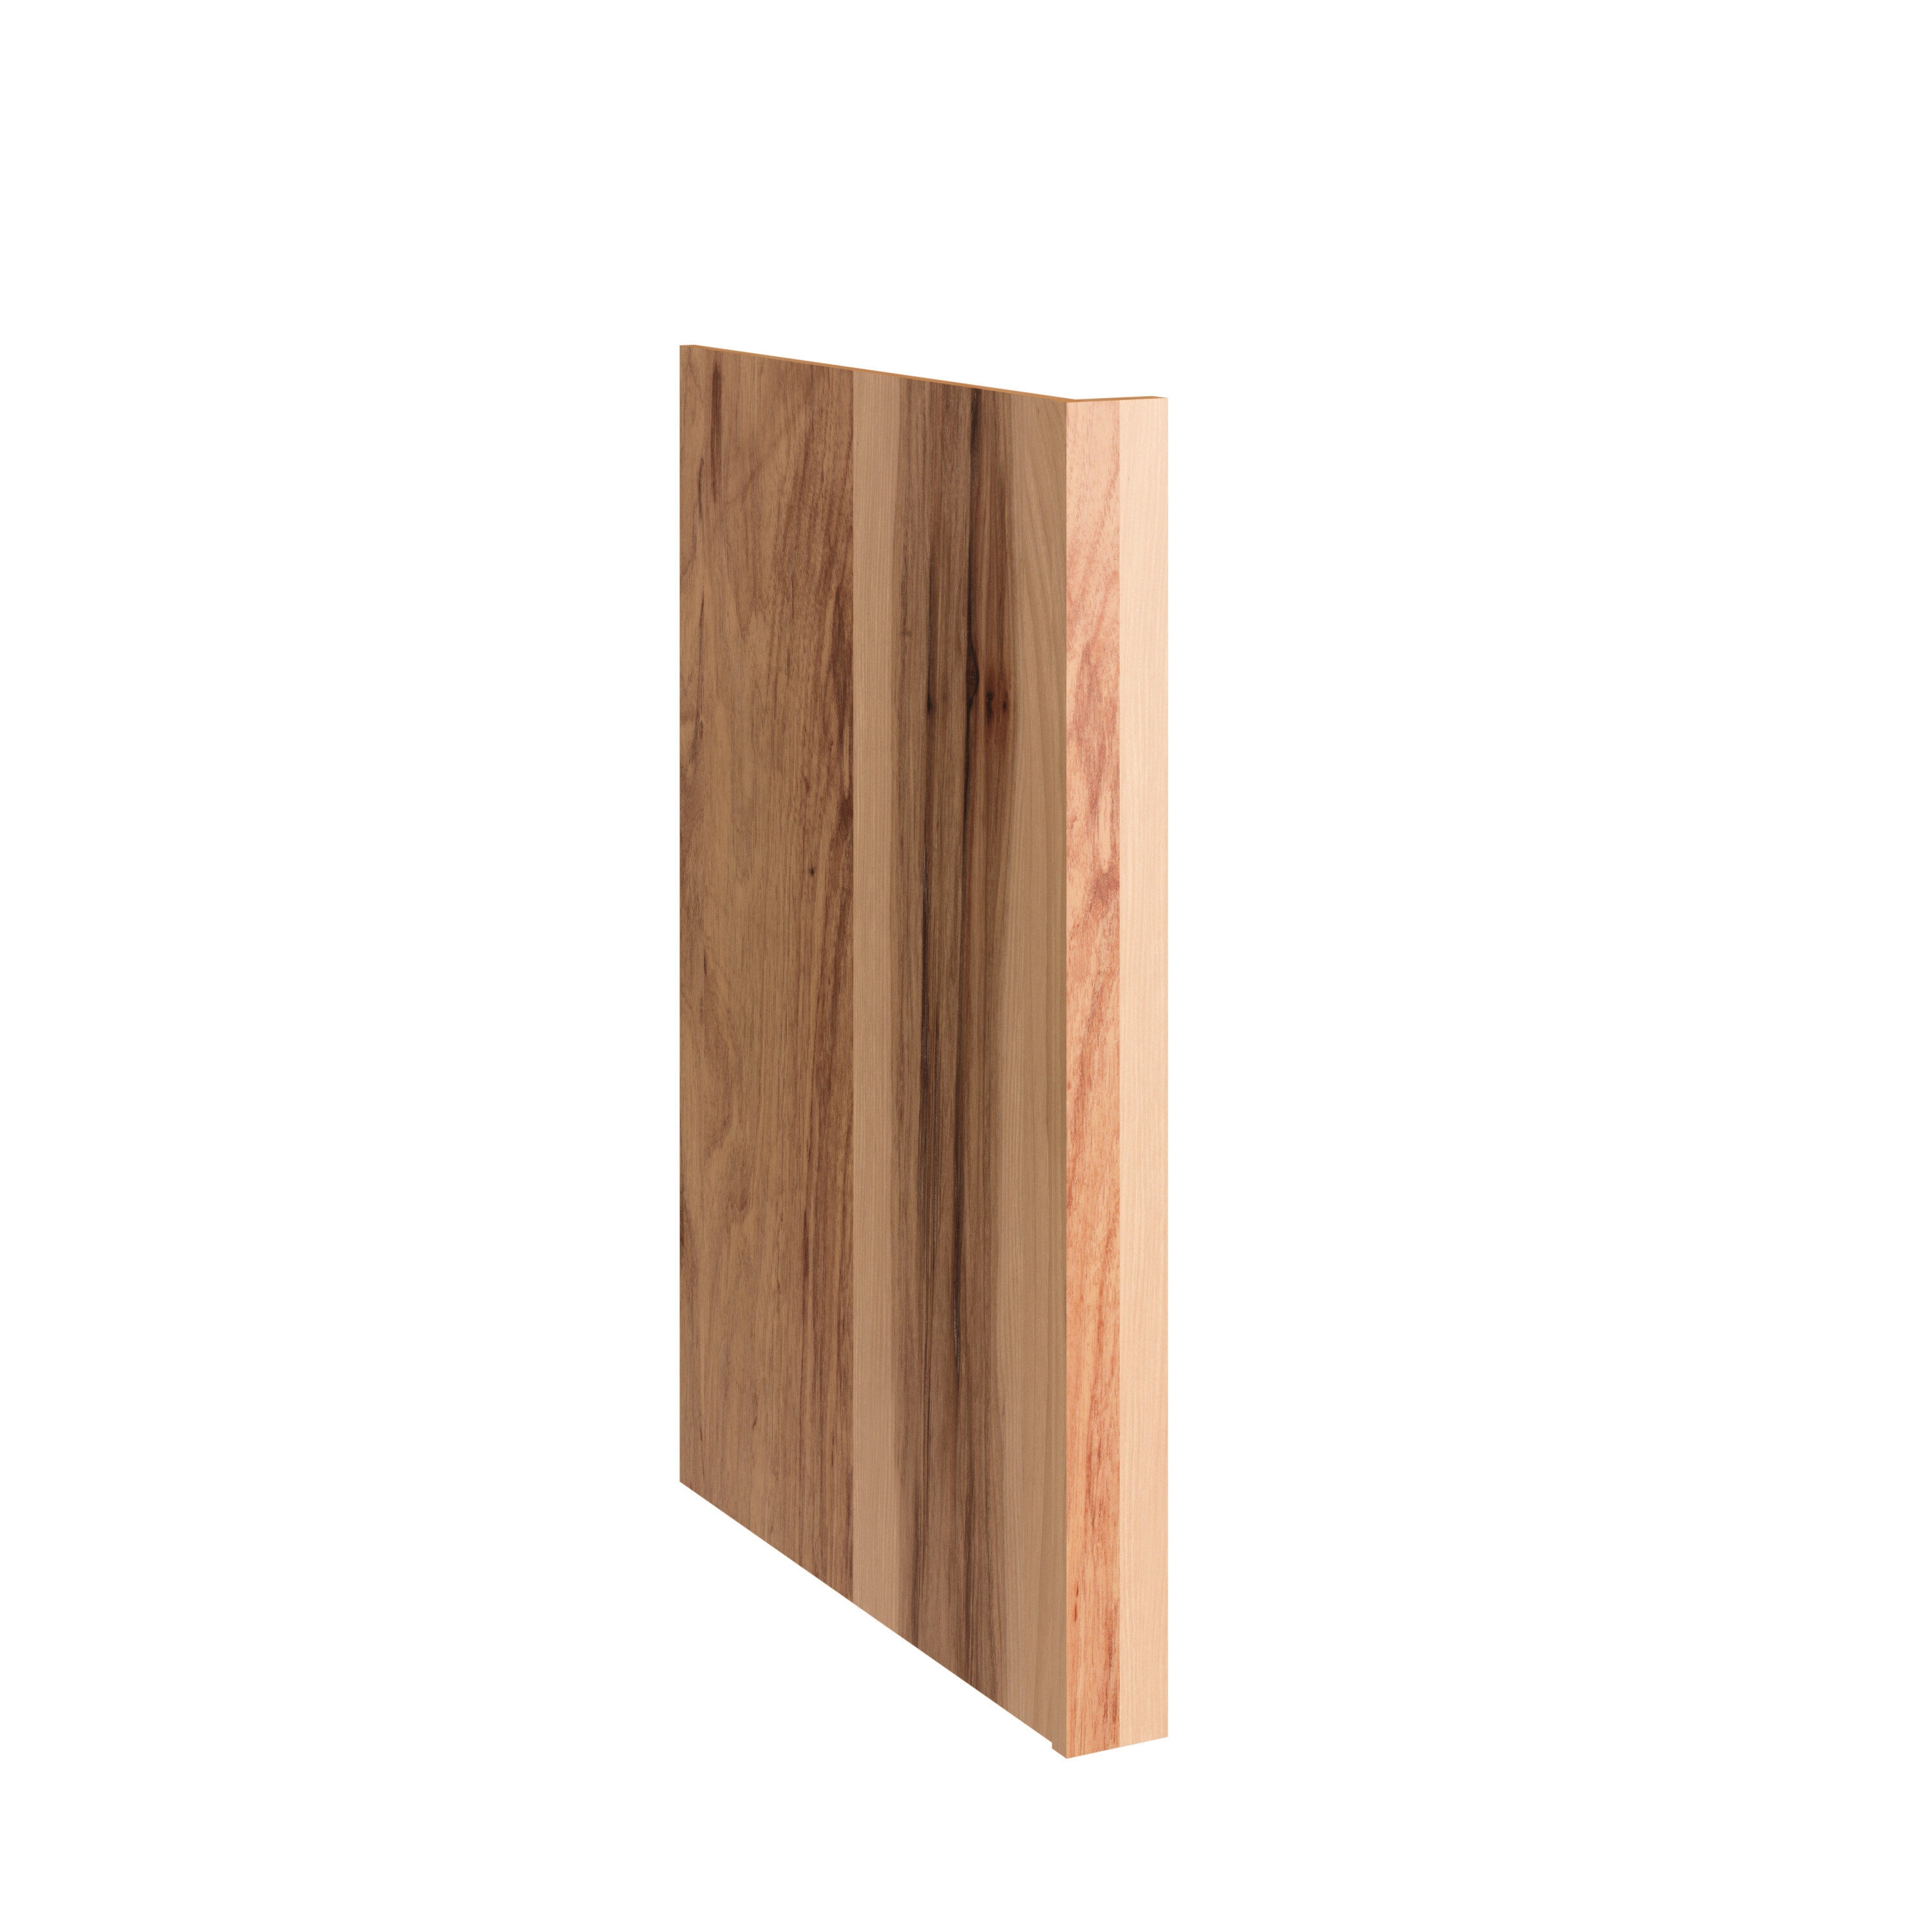 Surfaces 16.4375-in W x 0.75-in H x 18-in D Natural Birch Stained Cabinet  Shelf Kit